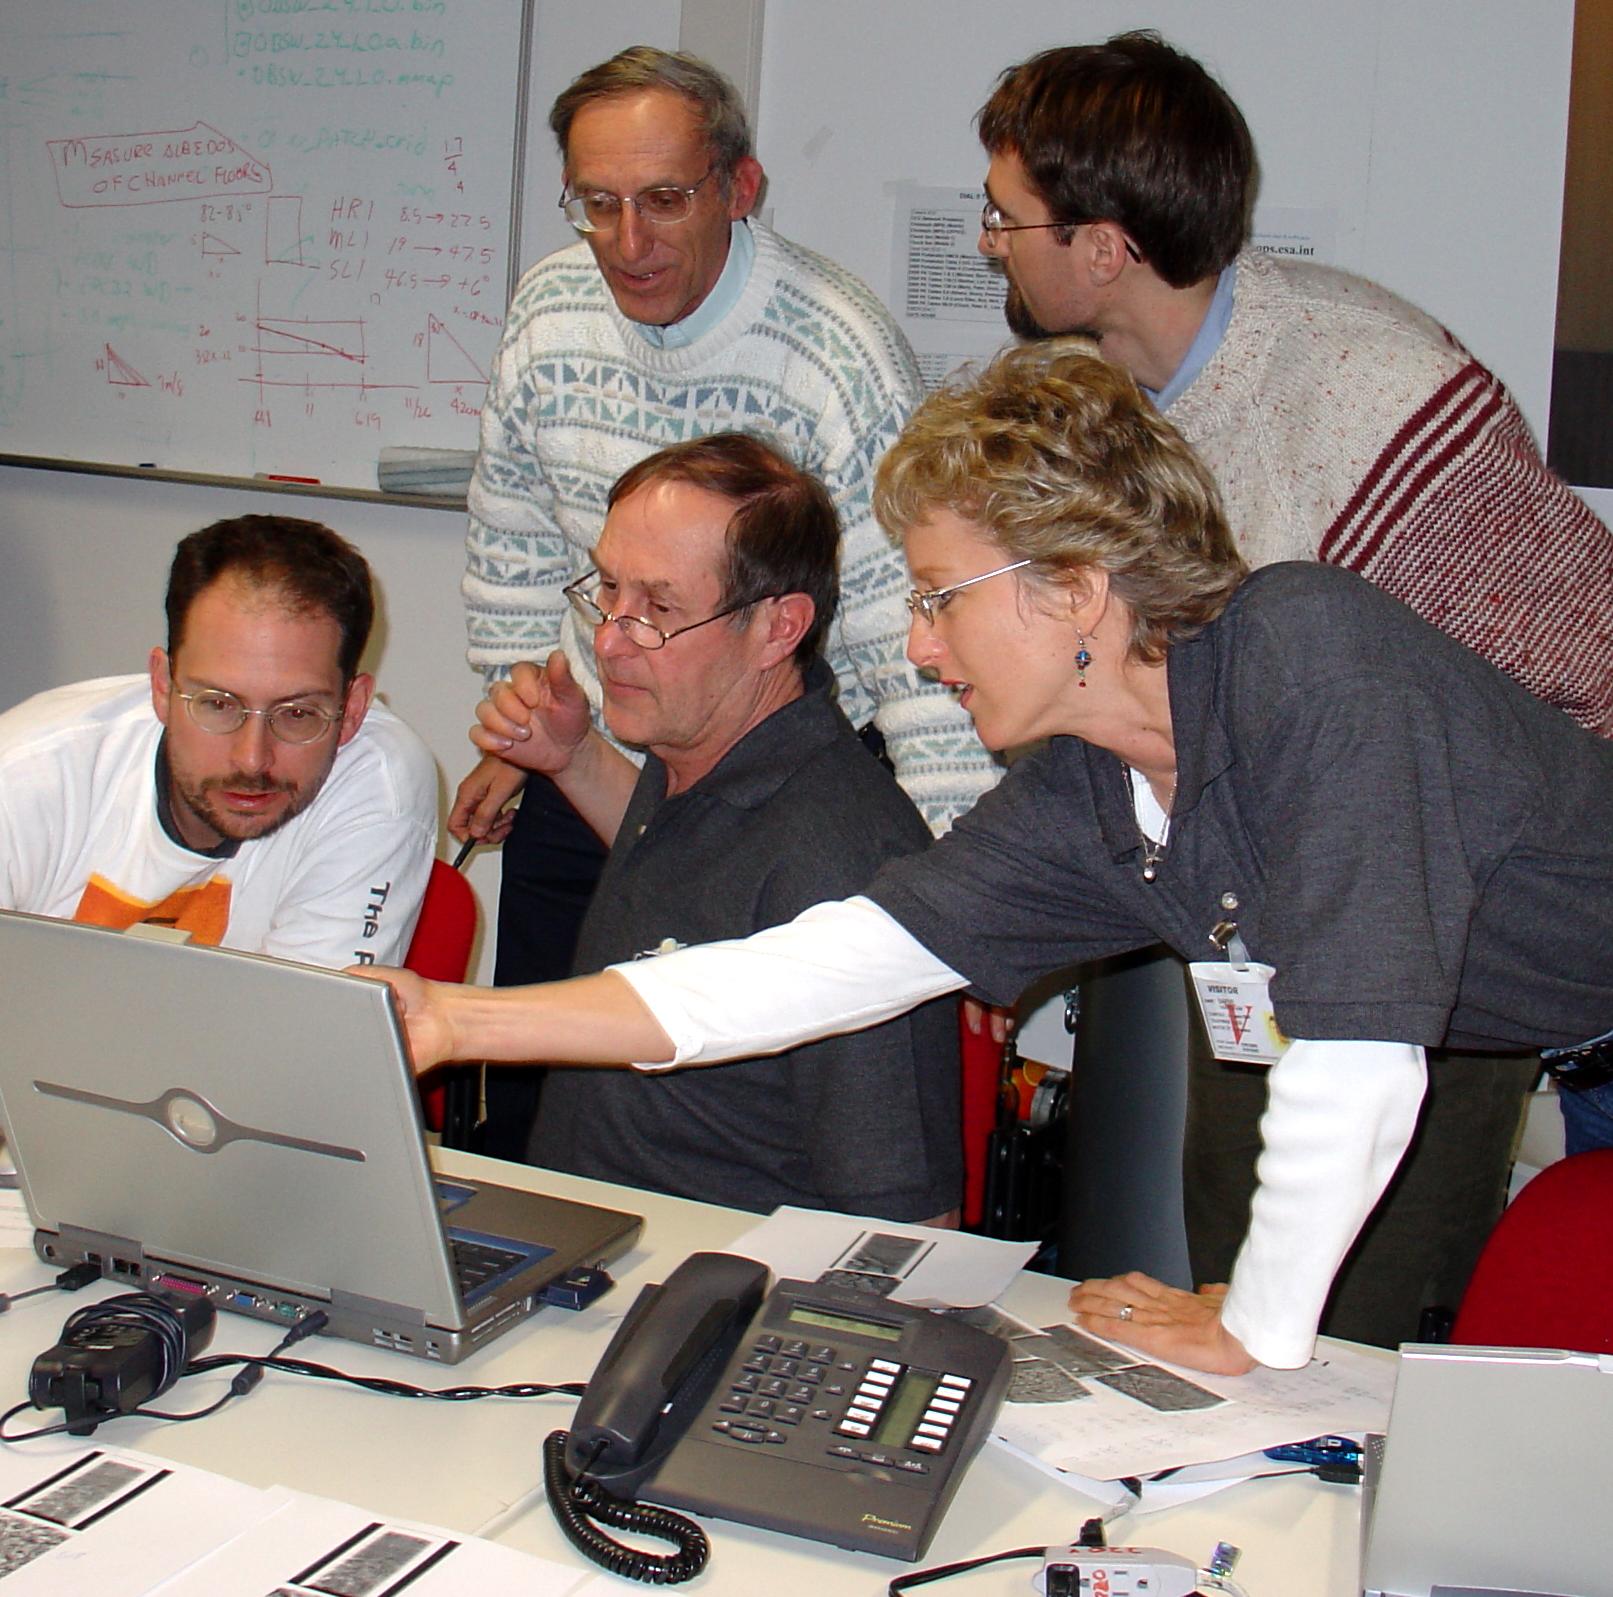 Five scientists gathered around a laptop looking at Huygens data